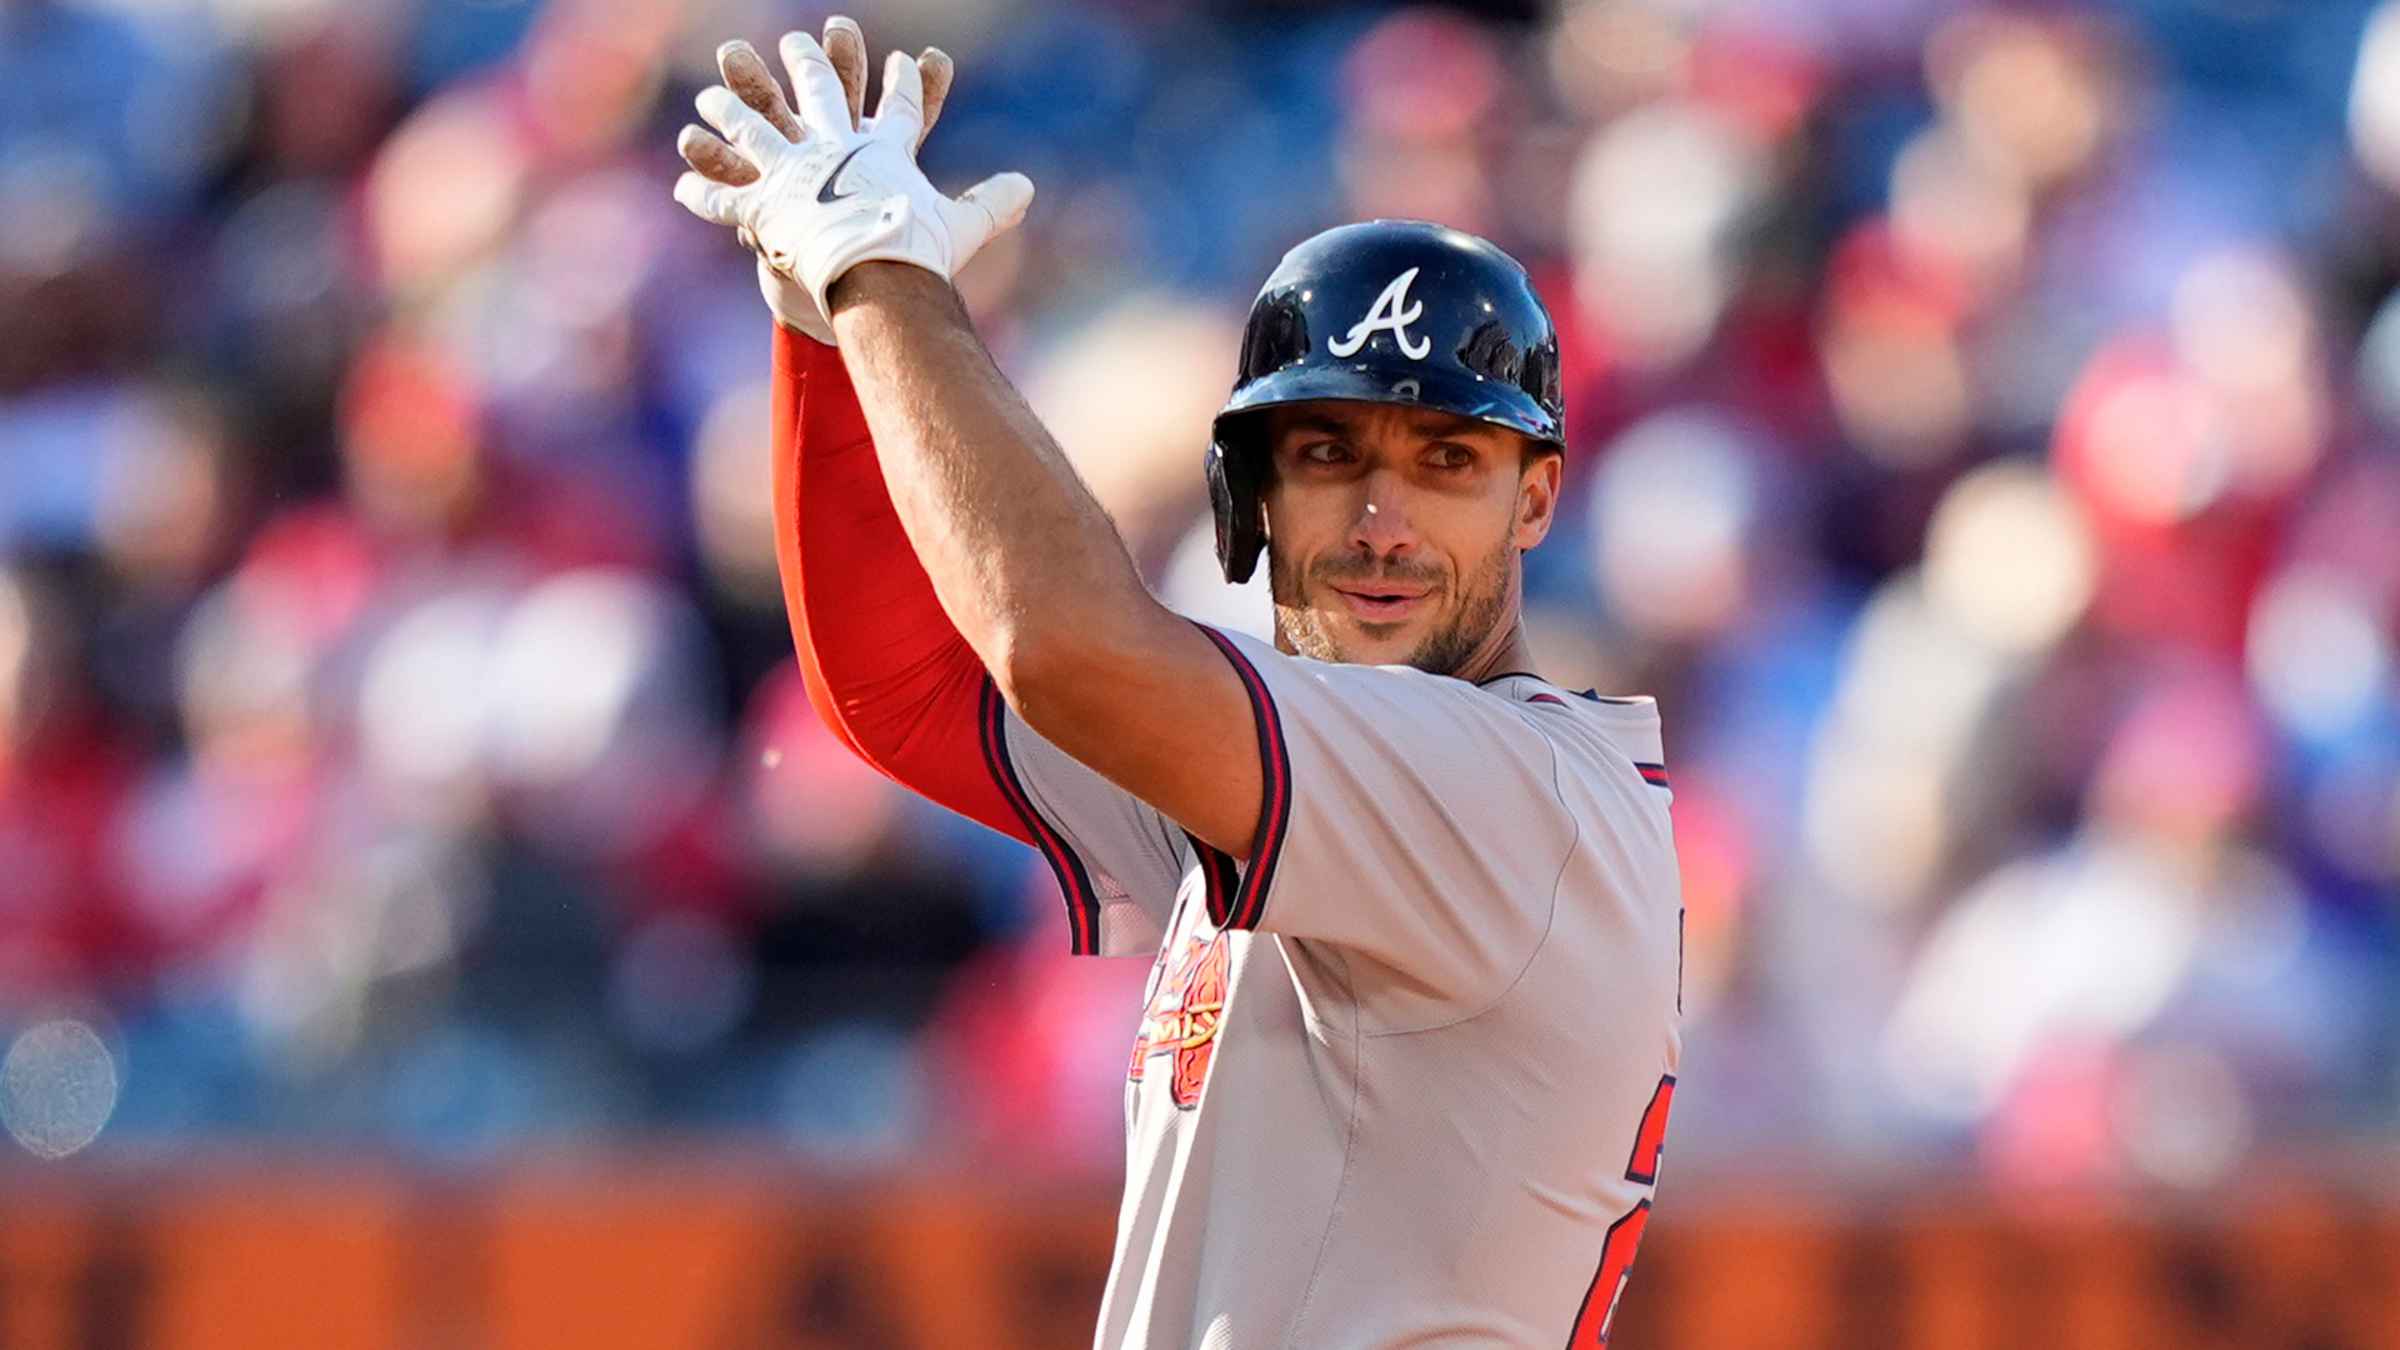 PHILADELPHIA -- Making fun of Matt Olson on his 30th birthday and drawing loud boos from a raucous Philadelphia crowd were just a couple of the ways the Braves celebrated the start of this new season. “When you go somewhere and you get booed, it feels good, especially when you’re